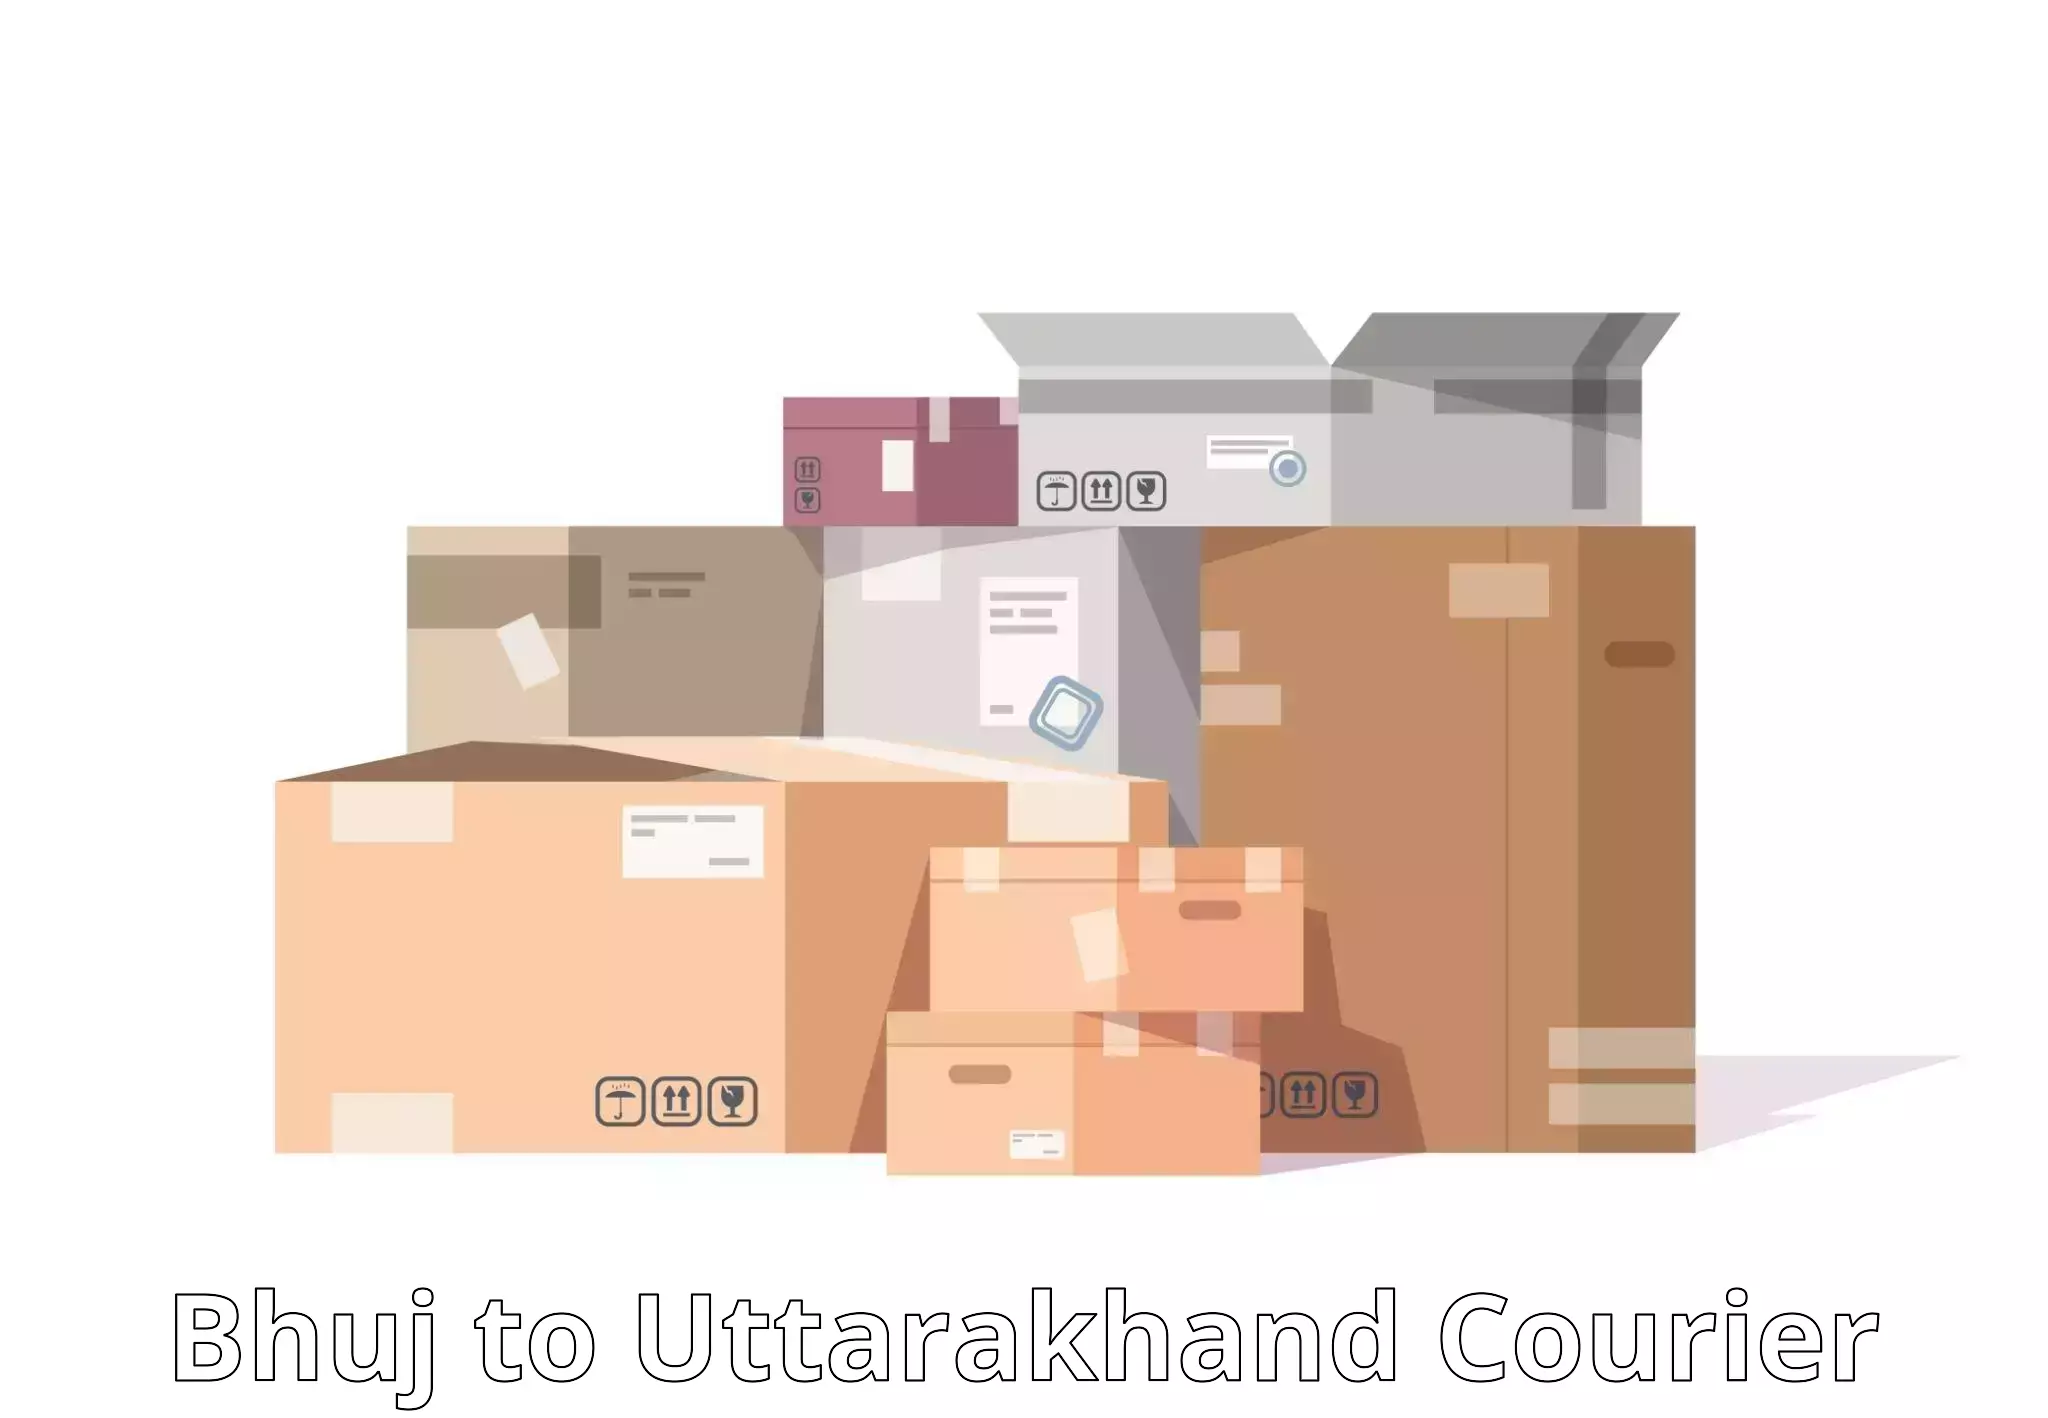 Round-the-clock parcel delivery Bhuj to Rudraprayag